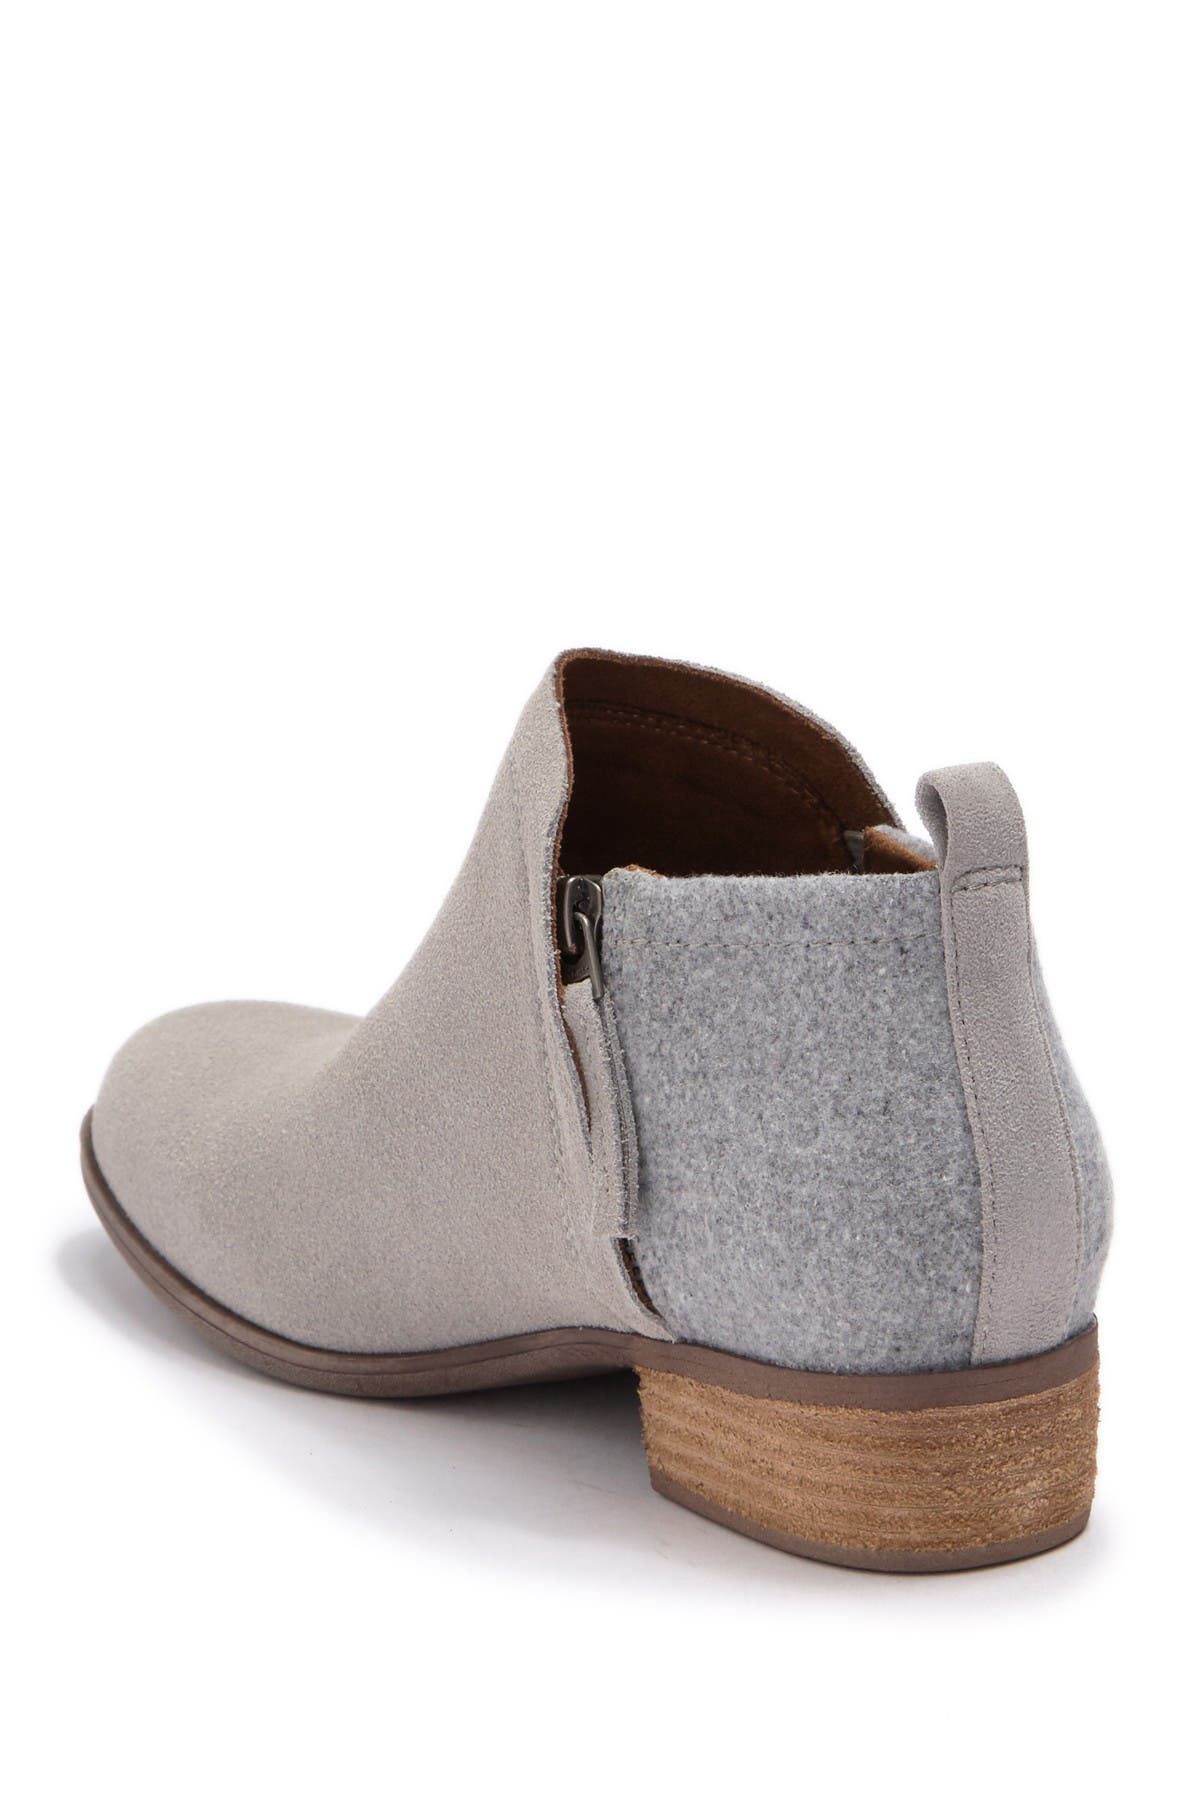 toms deia ankle boot